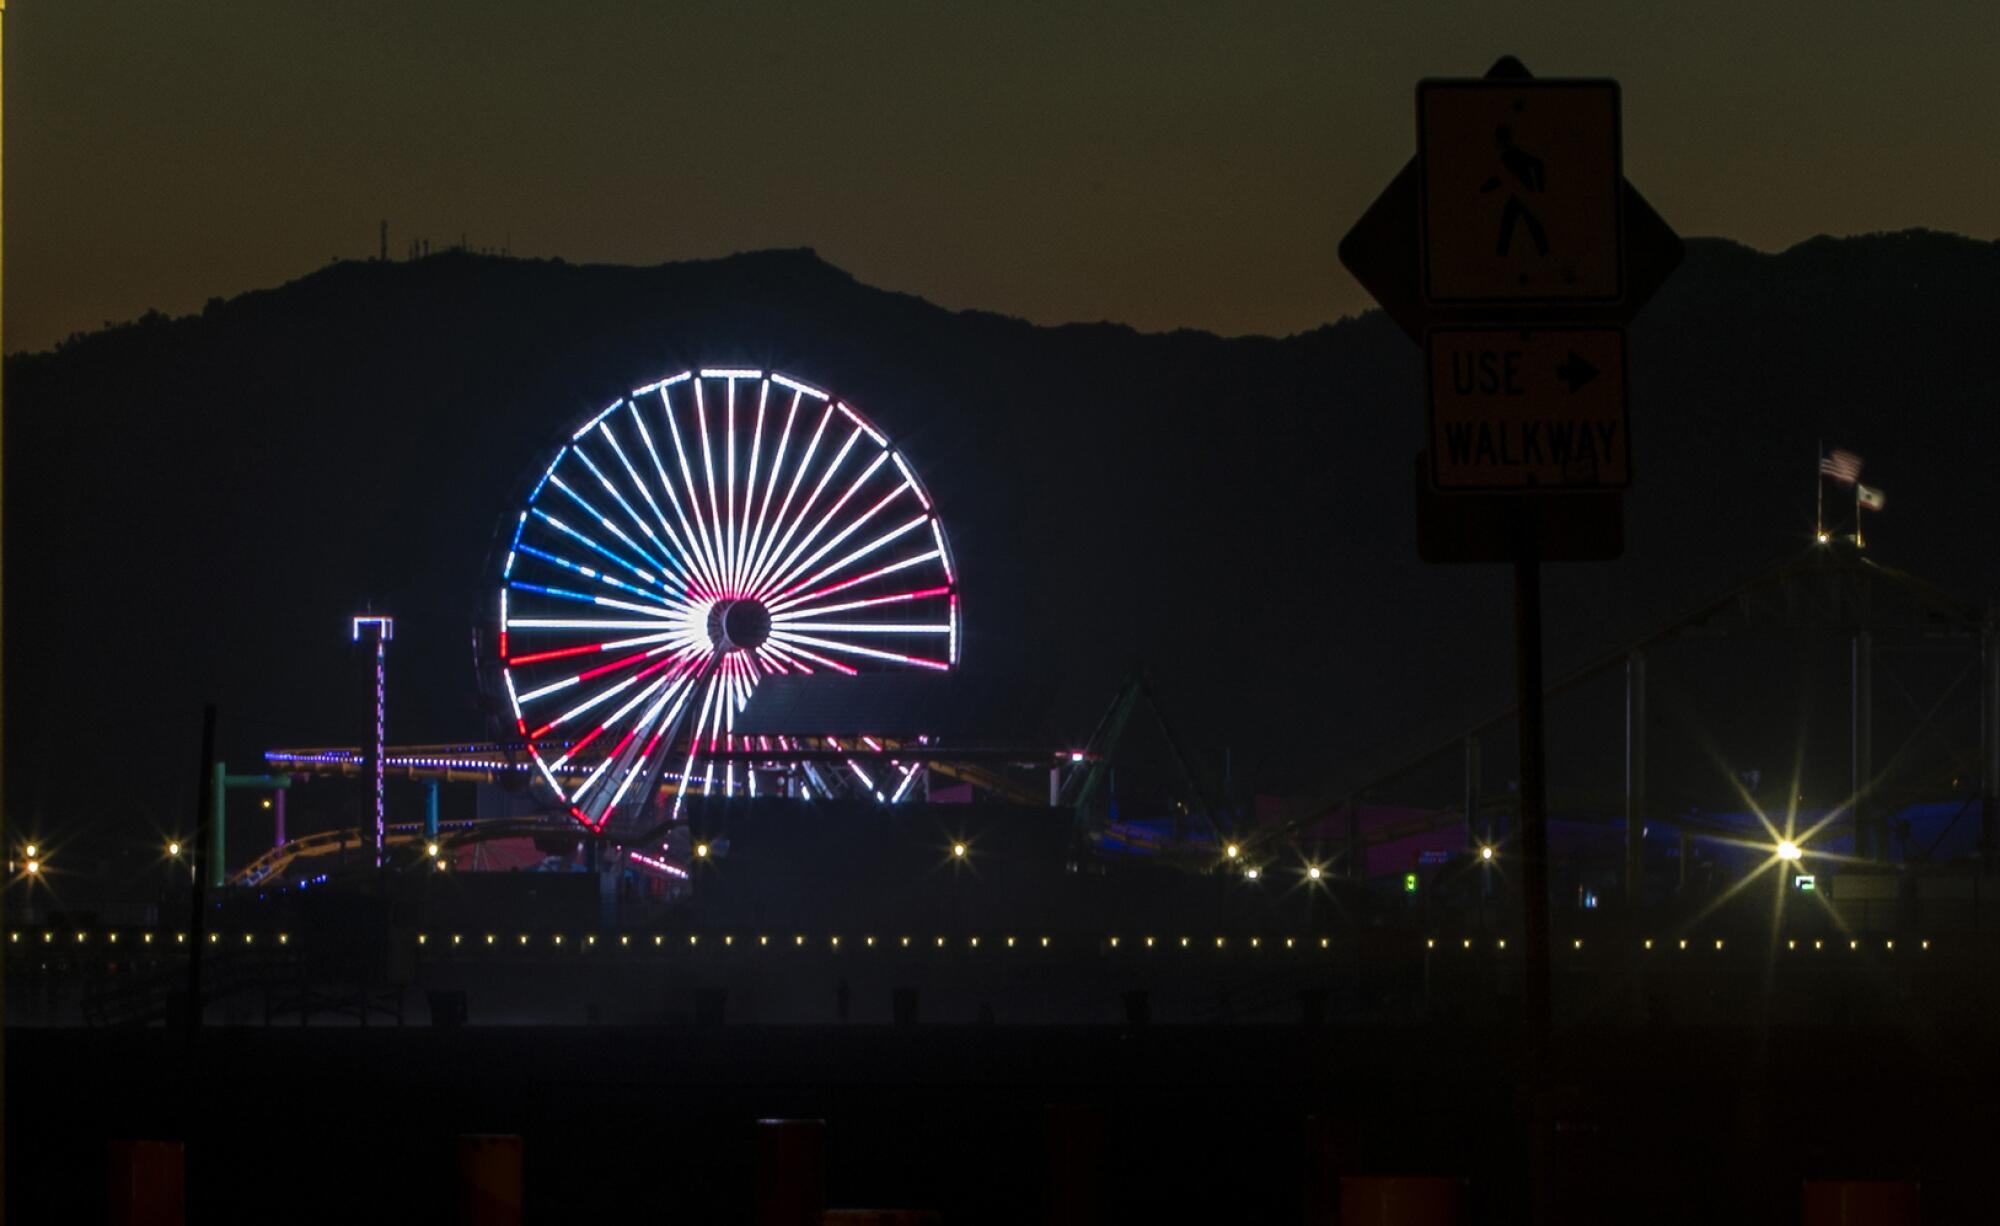 The Ferris wheel is lighted in patriotic colors on July 4 weekend at the pier in Santa Monica.